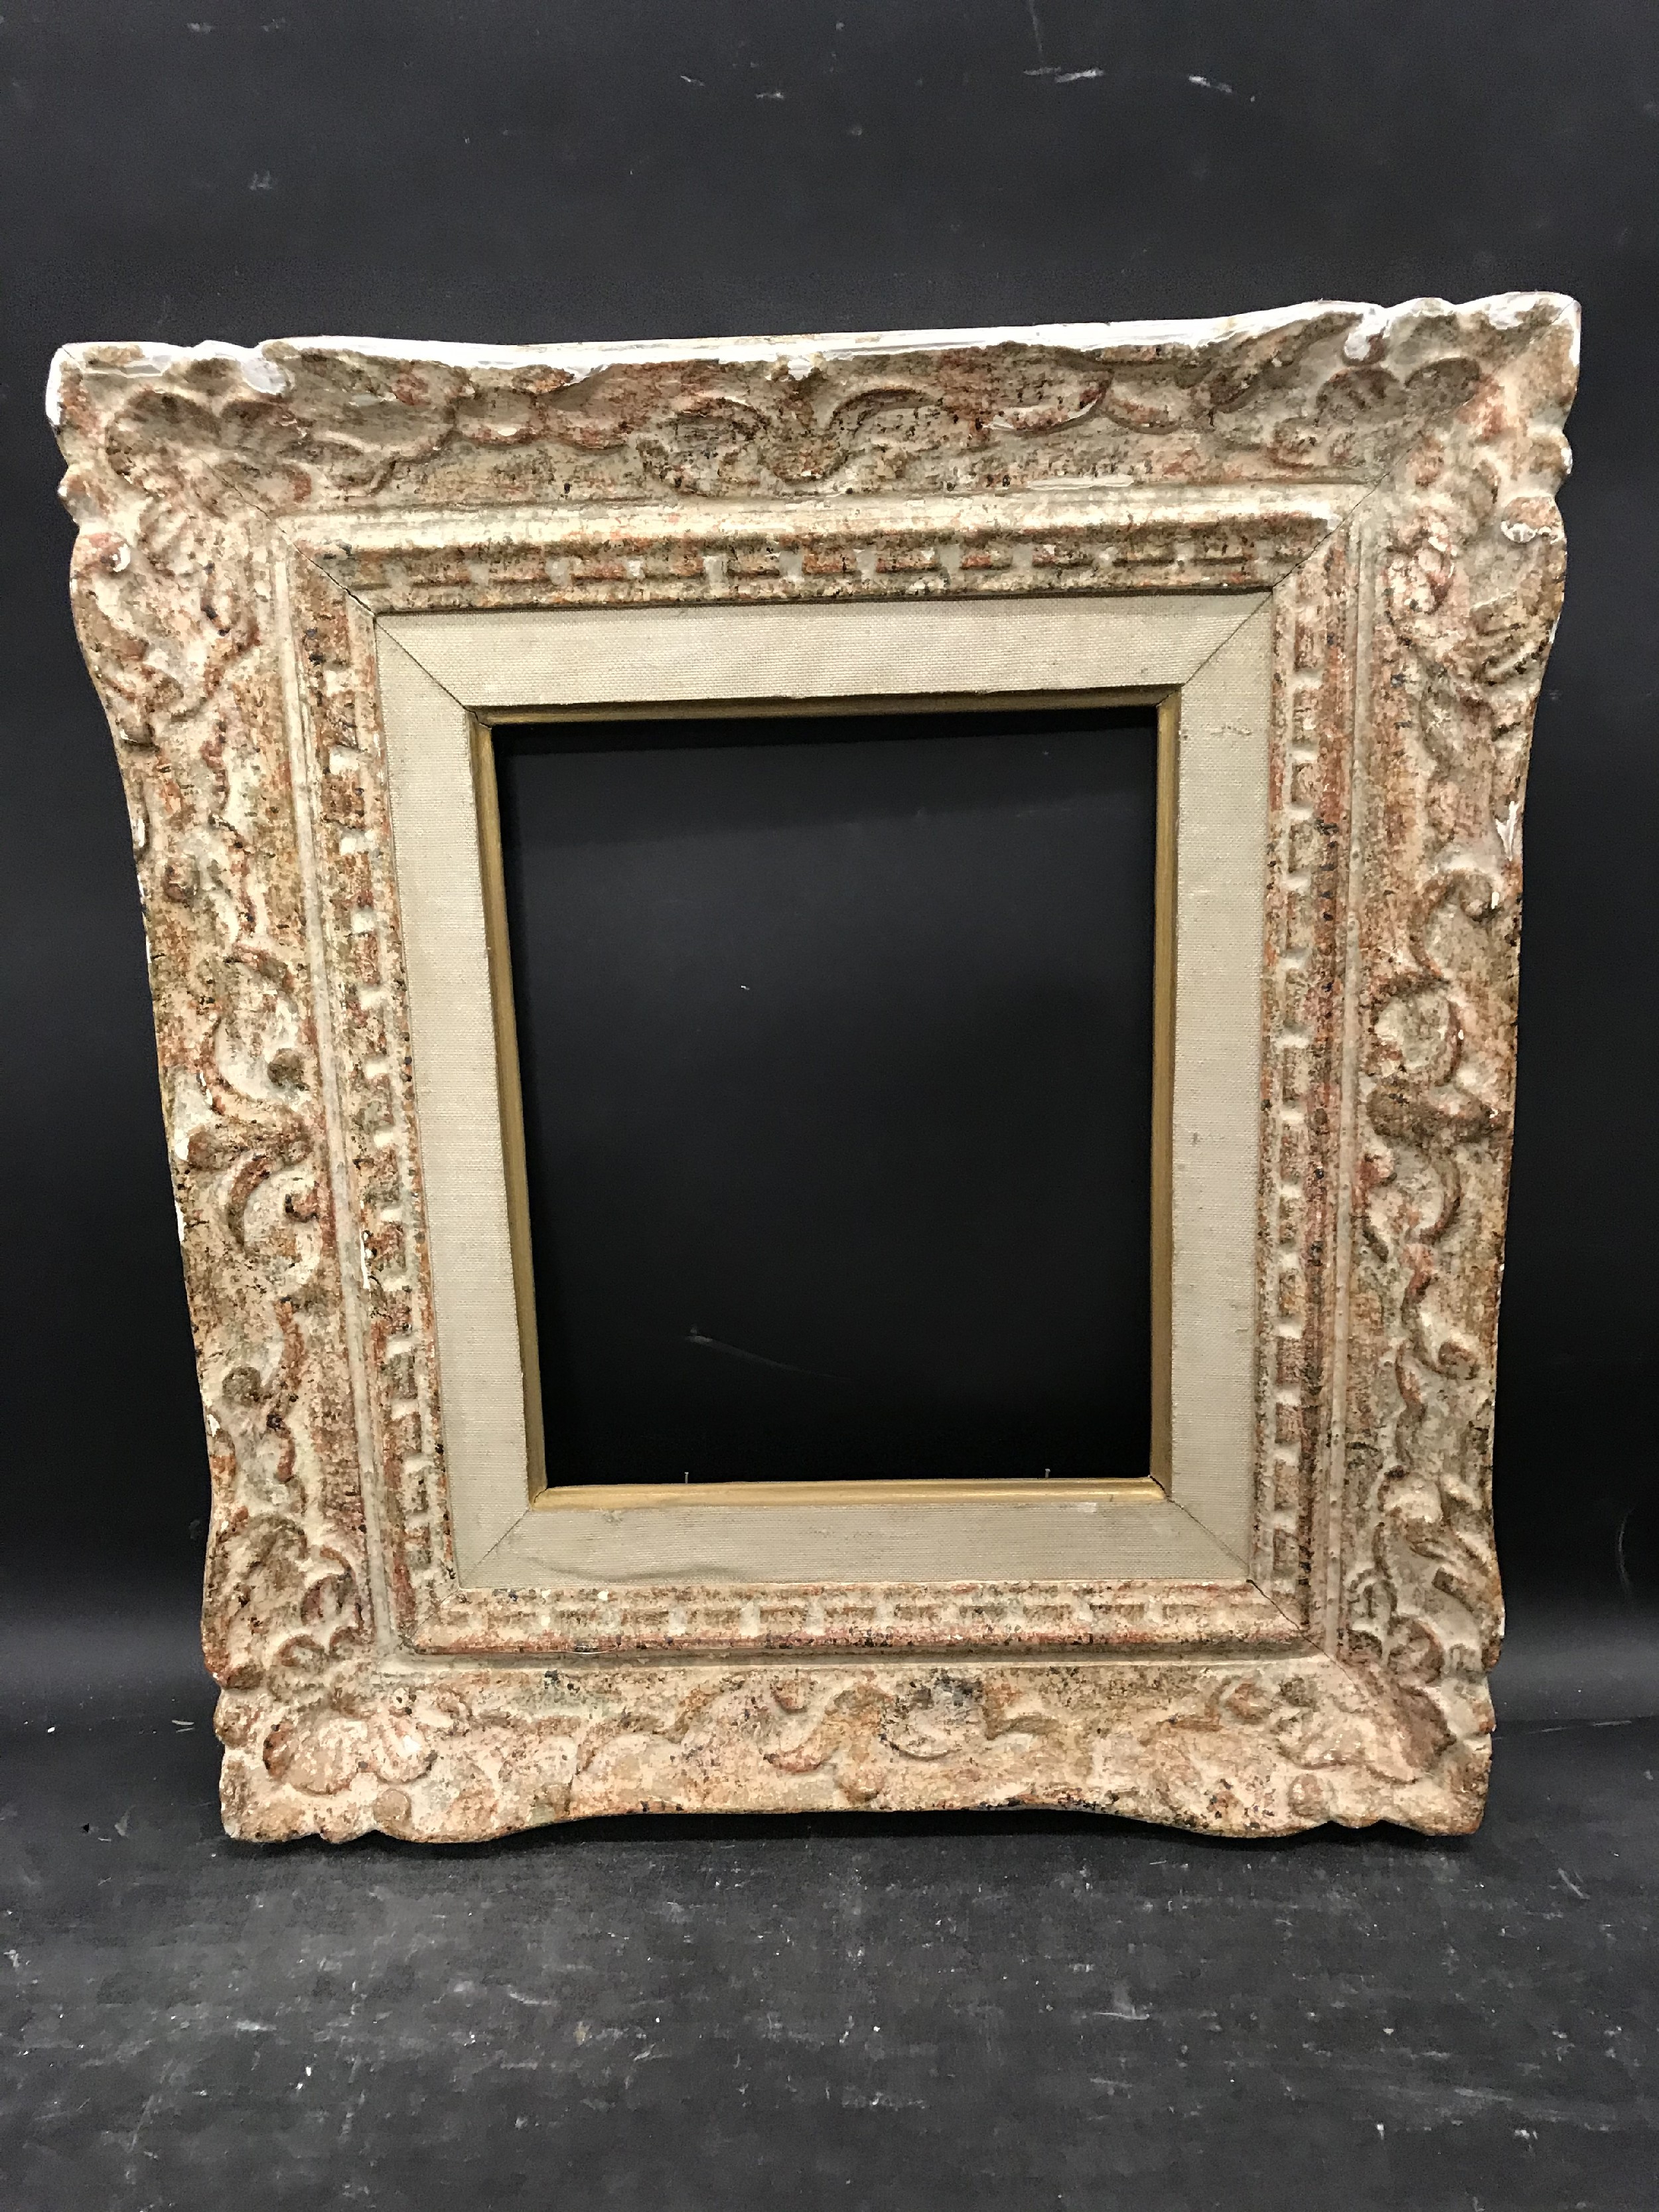 20th Century French School. A Carved Wood and Painted Frame, with fabric slip, 10.75" x 8.75" ( - Image 2 of 3